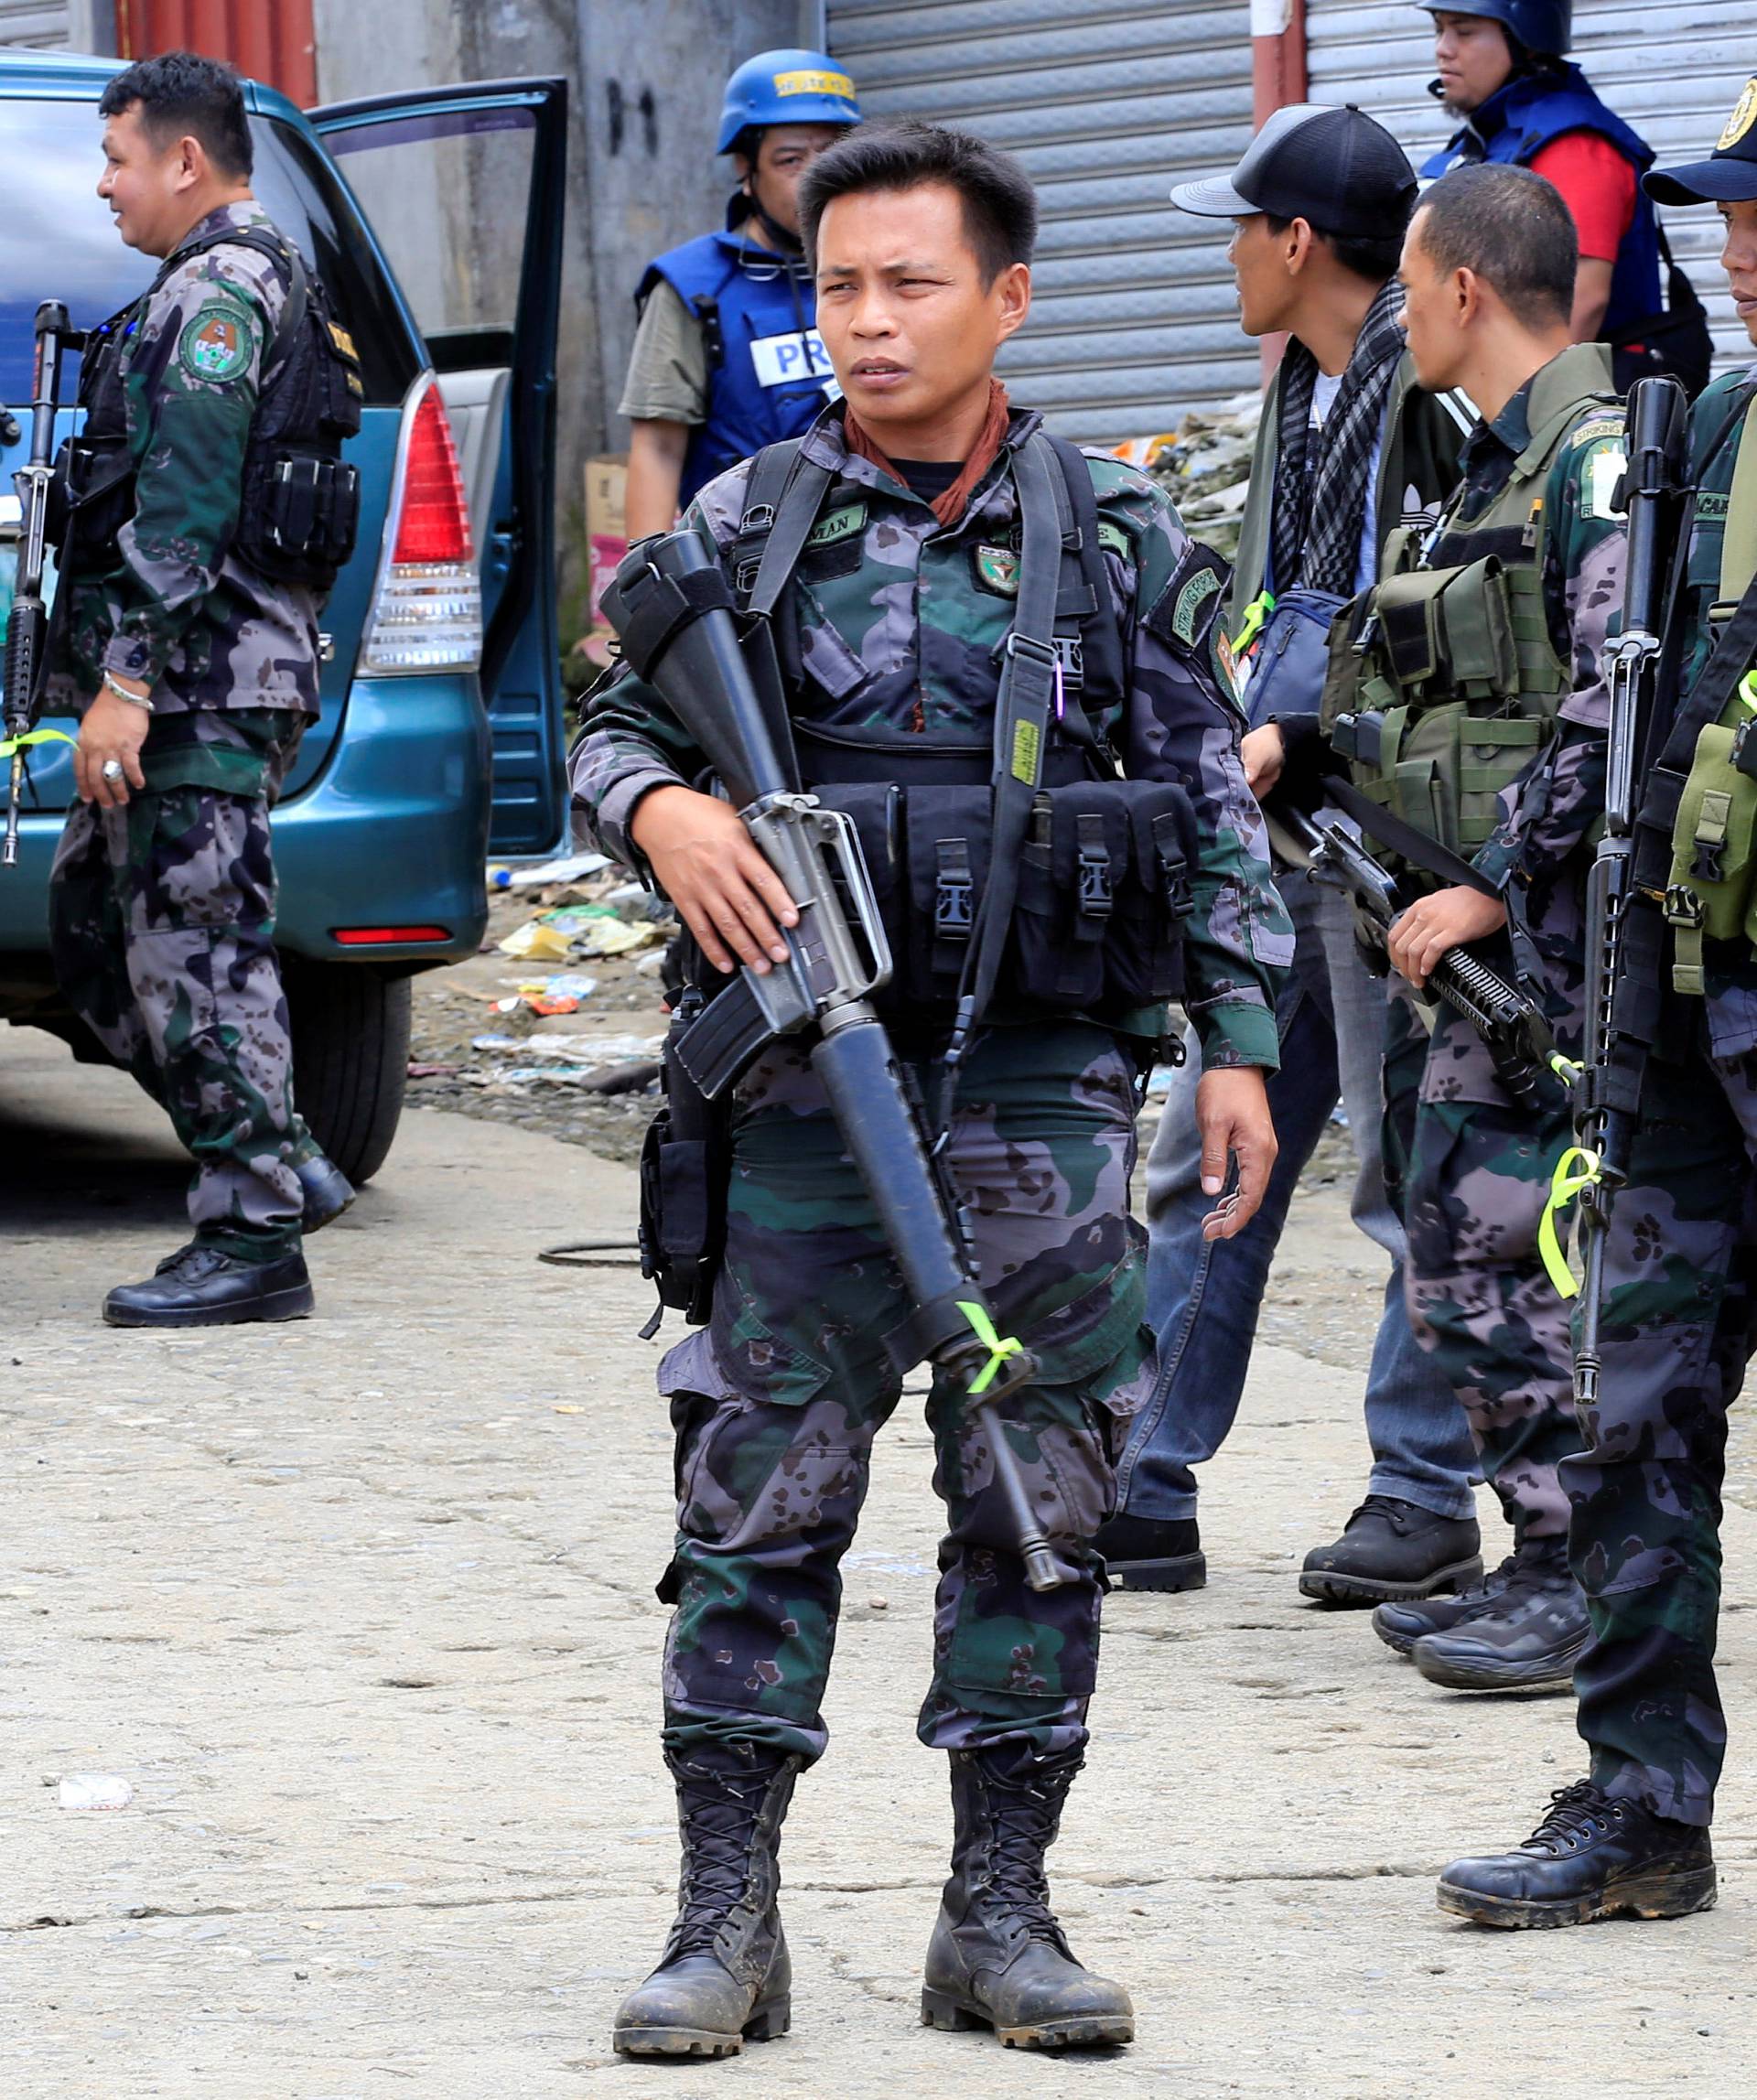 Policemen stand on guard while guarding a main street in Sarimanok village, in Marawi city